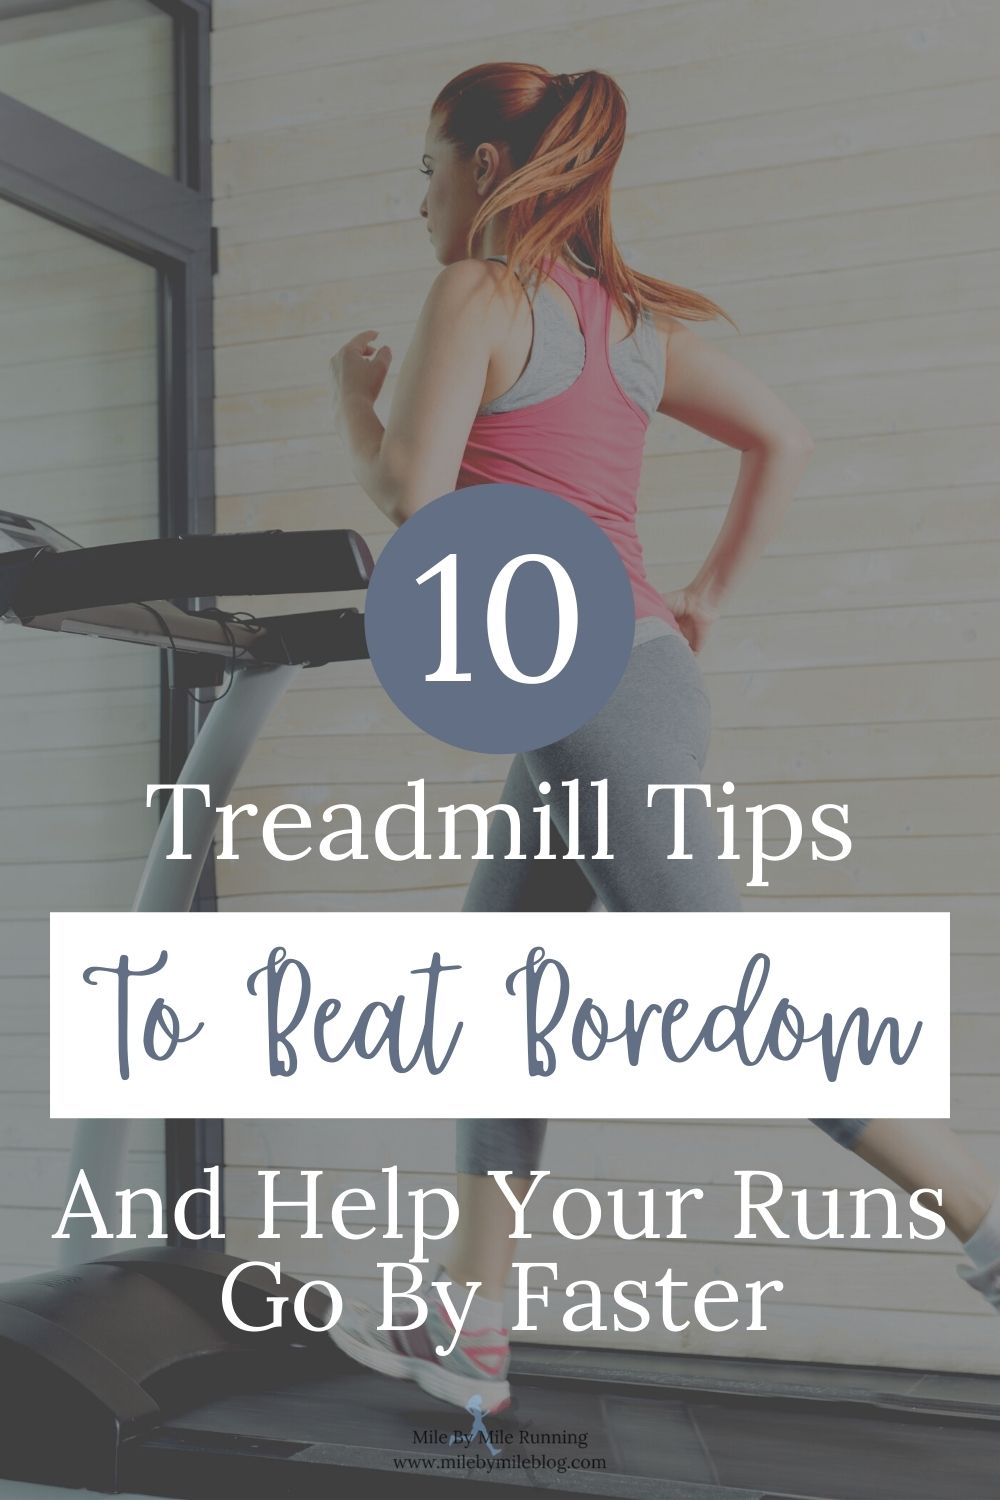 Sometimes treadmill runs are necessary, especially when the weather is bad or if you don't have childcare. Treadmill runs don't have to be torturous. Try these 10 treadmill tips to beat boredom and help your runs go by faster!